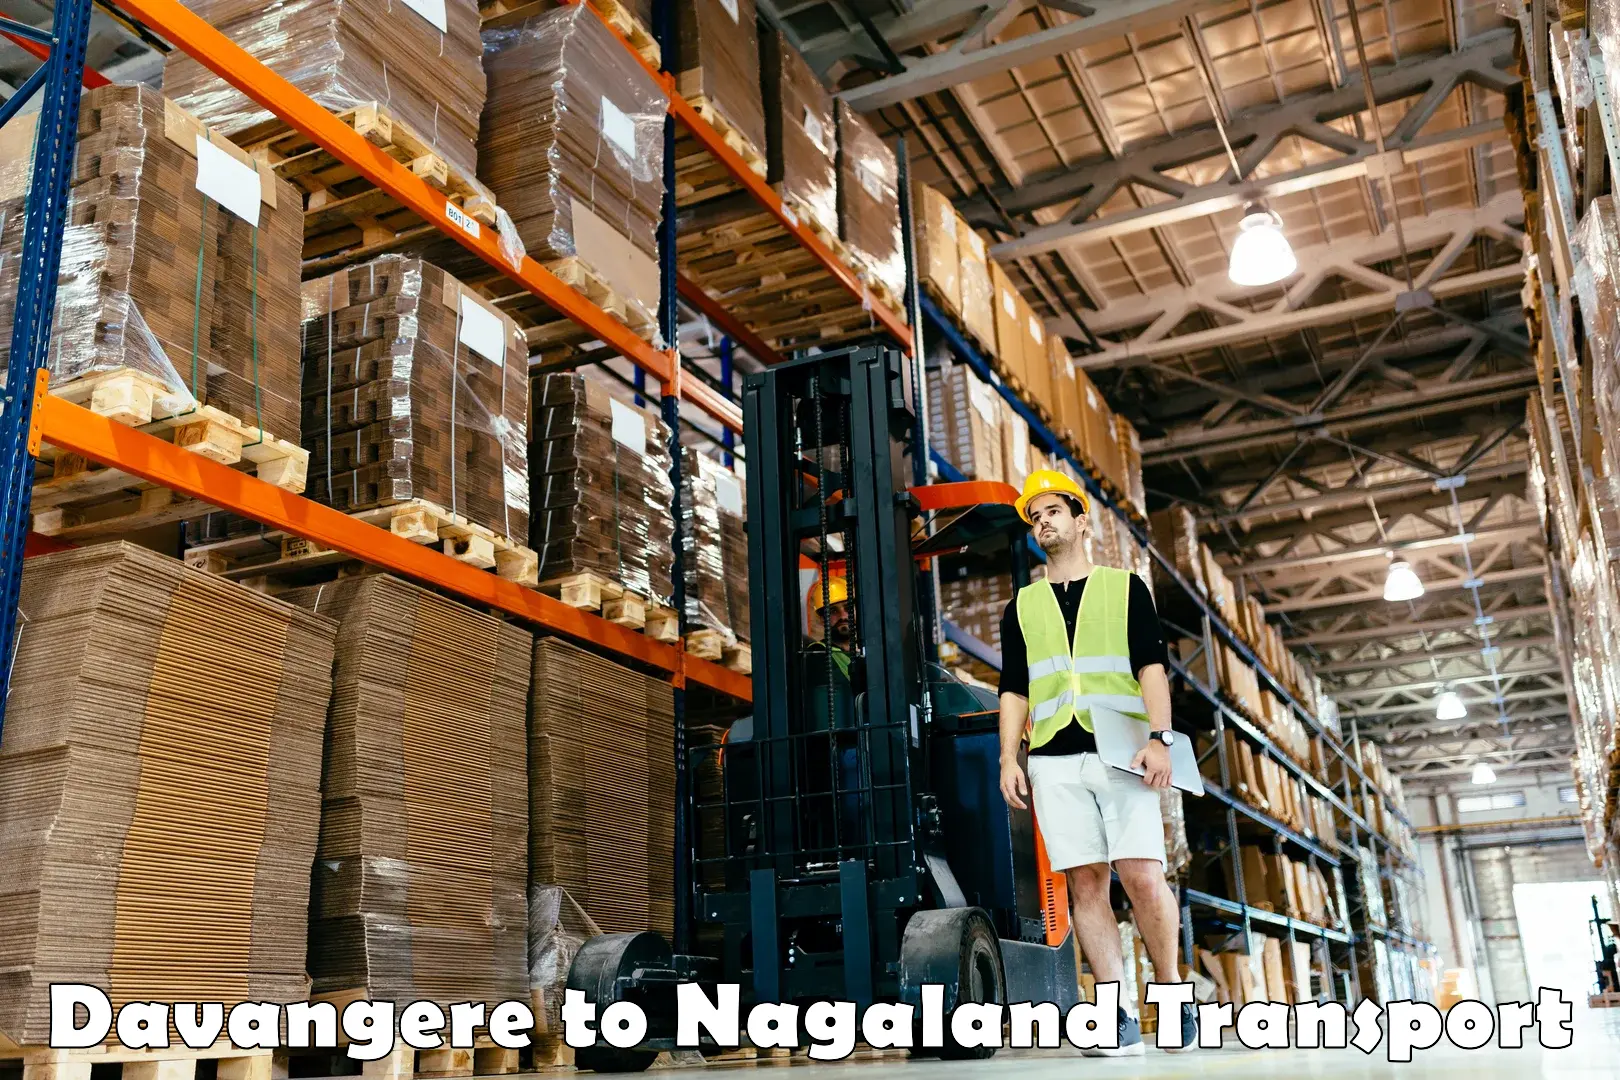 Goods delivery service Davangere to Nagaland